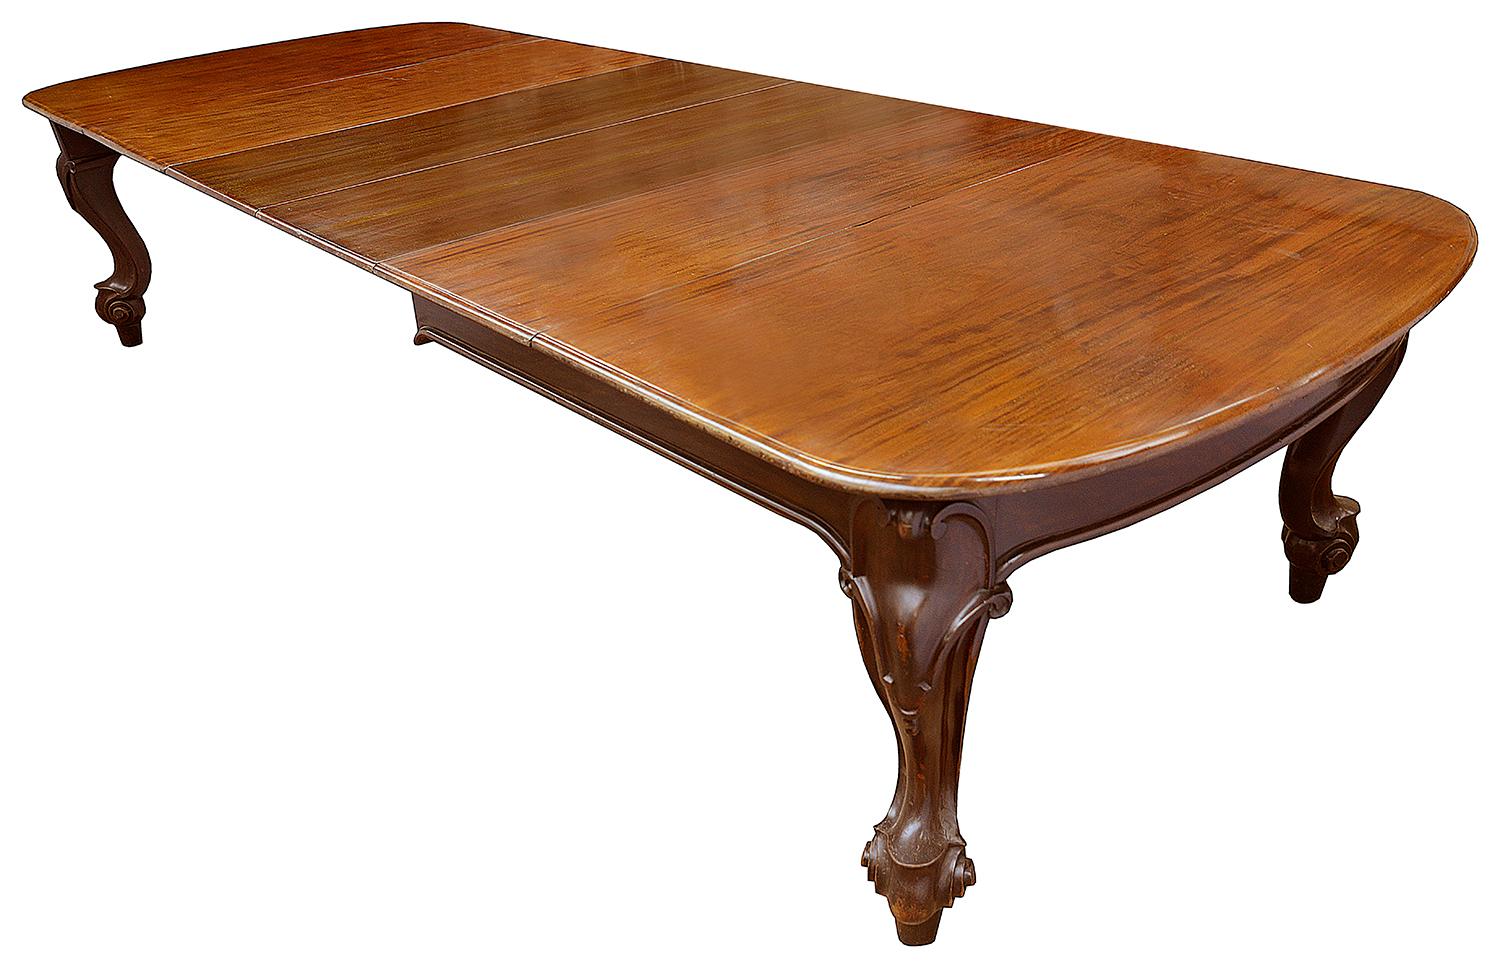 A large and impressive 19th century Victorian period mahogany extending ding table, with its five original leaves, raised on well carved cabriole legs with a central turned leg support.
Seats maximum 14
Fully adjustable down to seating four.